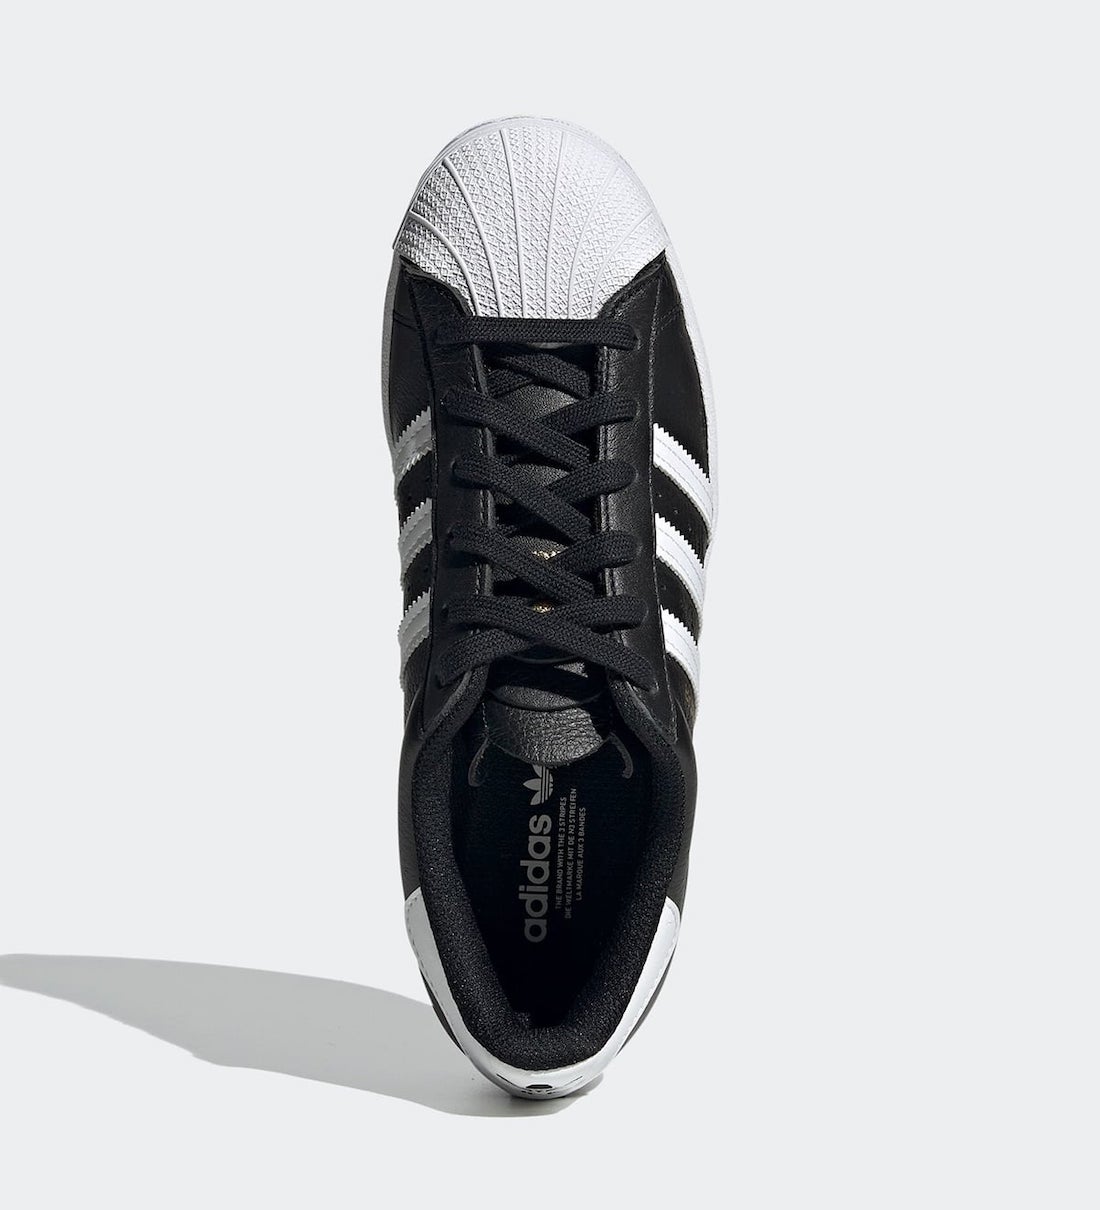 adidas Superstar Triple Tongue Black H03905 Release Date 3